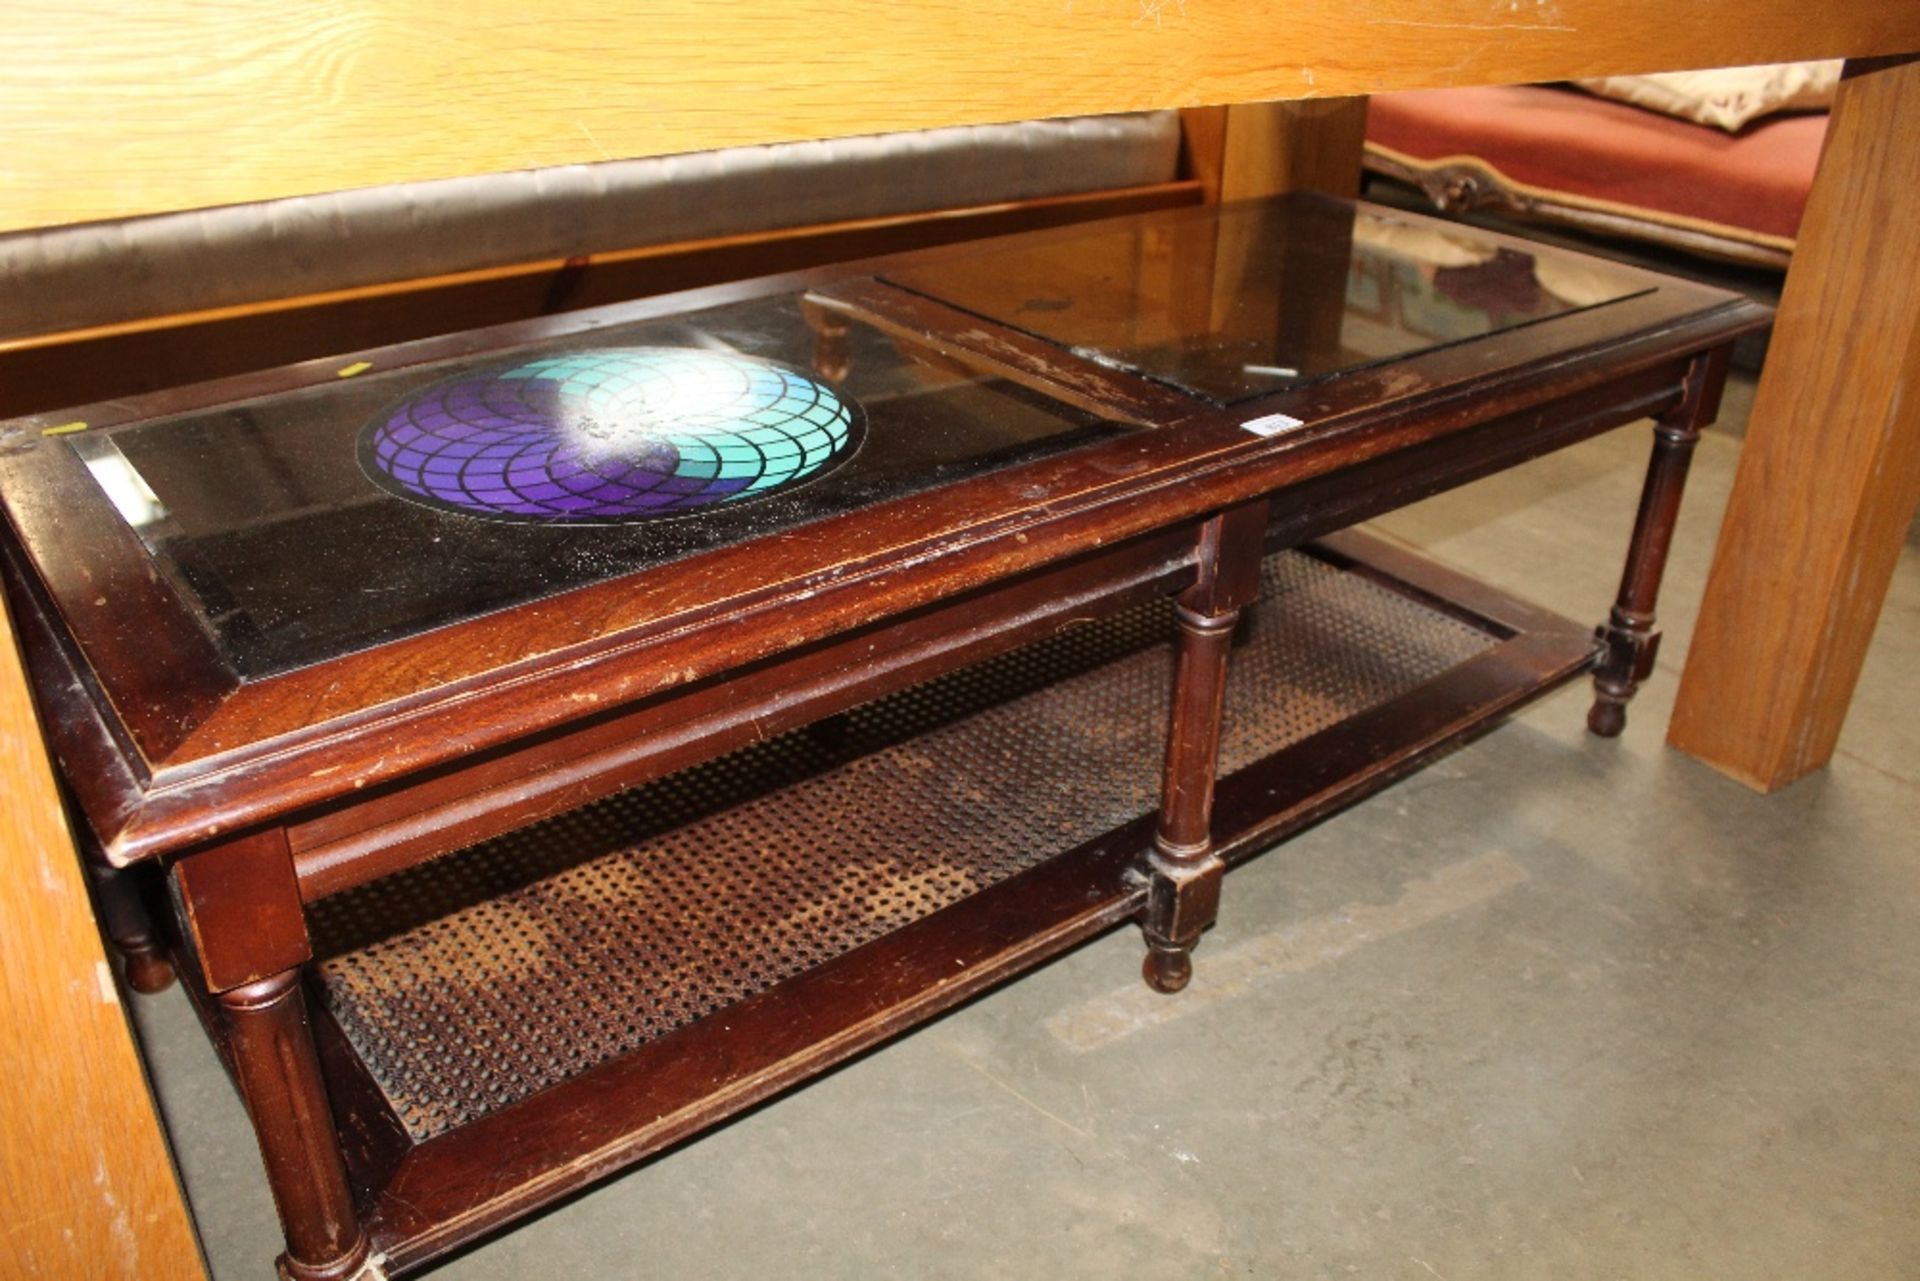 A wooden and glass topped coffee table